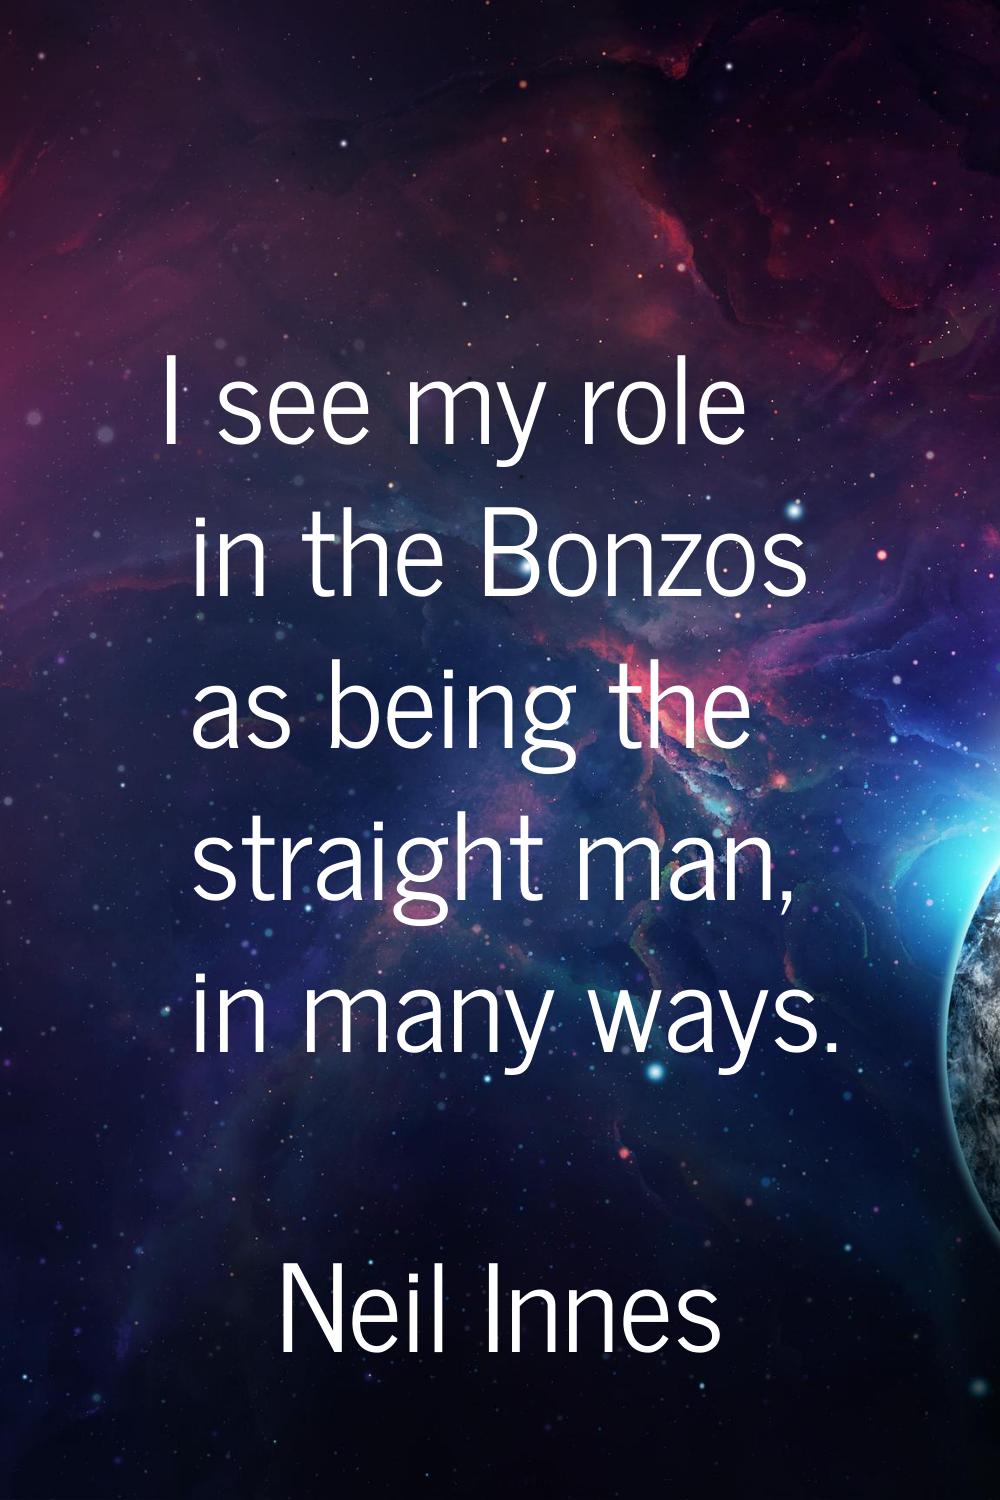 I see my role in the Bonzos as being the straight man, in many ways.